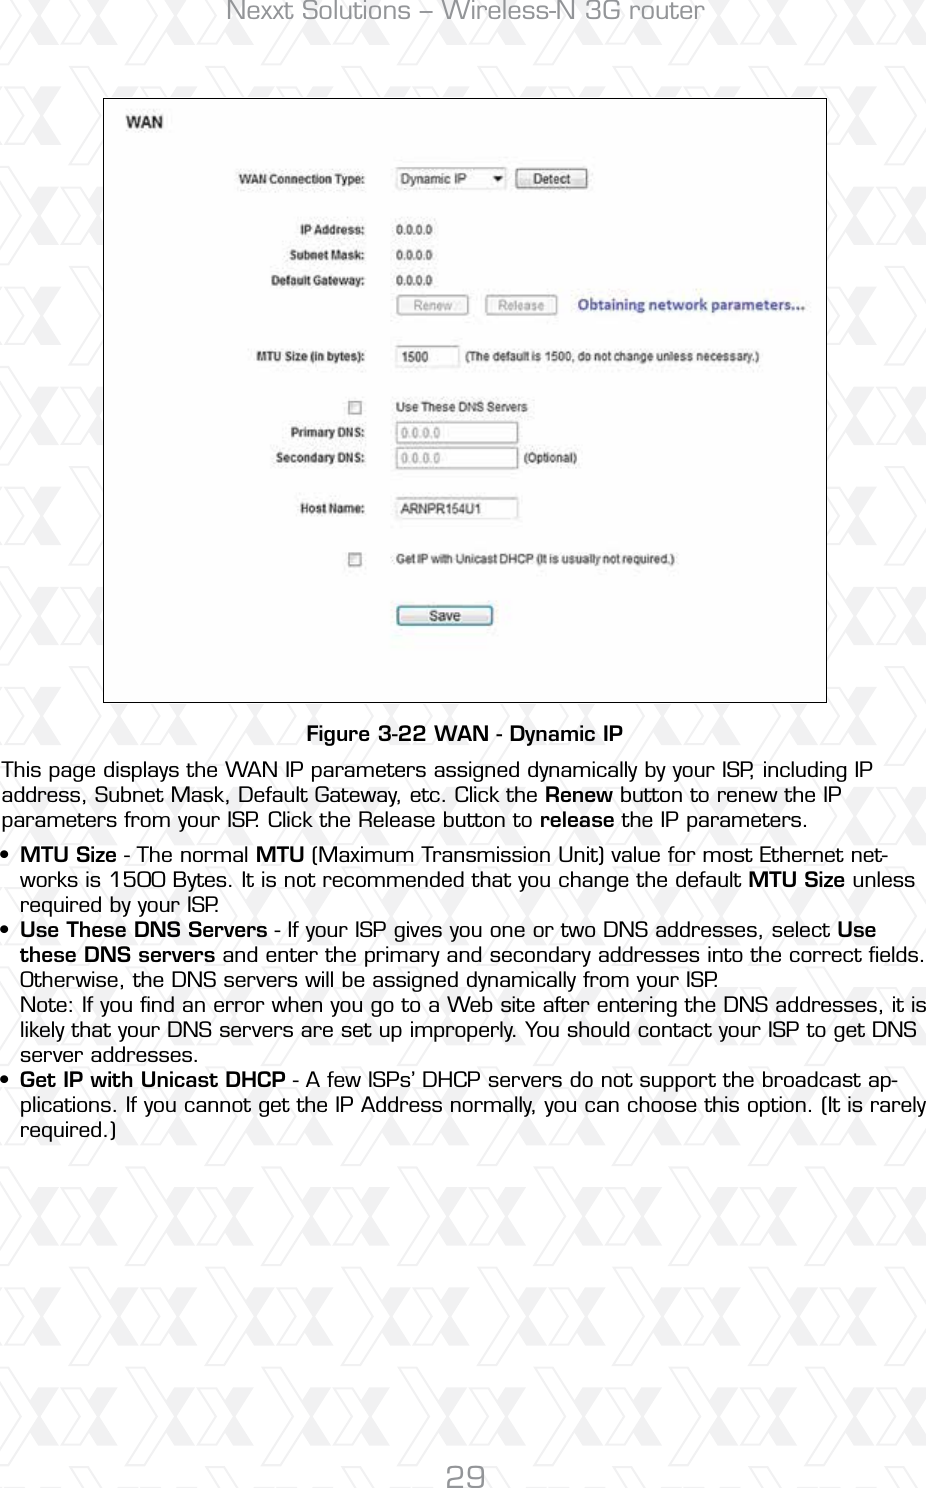 Nexxt Solutions – Wireless-N 3G router29Figure 3-22 WAN - Dynamic IPThis page displays the WAN IP parameters assigned dynamically by your ISP, including IP address, Subnet Mask, Default Gateway, etc. Click the Renew button to renew the IP parameters from your ISP. Click the Release button to release the IP parameters.MTU Size - The normal MTU (Maximum Transmission Unit) value for most Ethernet net-works is 1500 Bytes. It is not recommended that you change the default MTU Size unless required by your ISP. Use These DNS Servers - If your ISP gives you one or two DNS addresses, select Use these DNS servers and enter the primary and secondary addresses into the correct ﬁelds. Otherwise, the DNS servers will be assigned dynamically from your ISP. Note: If you ﬁnd an error when you go to a Web site after entering the DNS addresses, it is likely that your DNS servers are set up improperly. You should contact your ISP to get DNS server addresses. Get IP with Unicast DHCP - A few ISPs’ DHCP servers do not support the broadcast ap-plications. If you cannot get the IP Address normally, you can choose this option. (It is rarely required.)•••